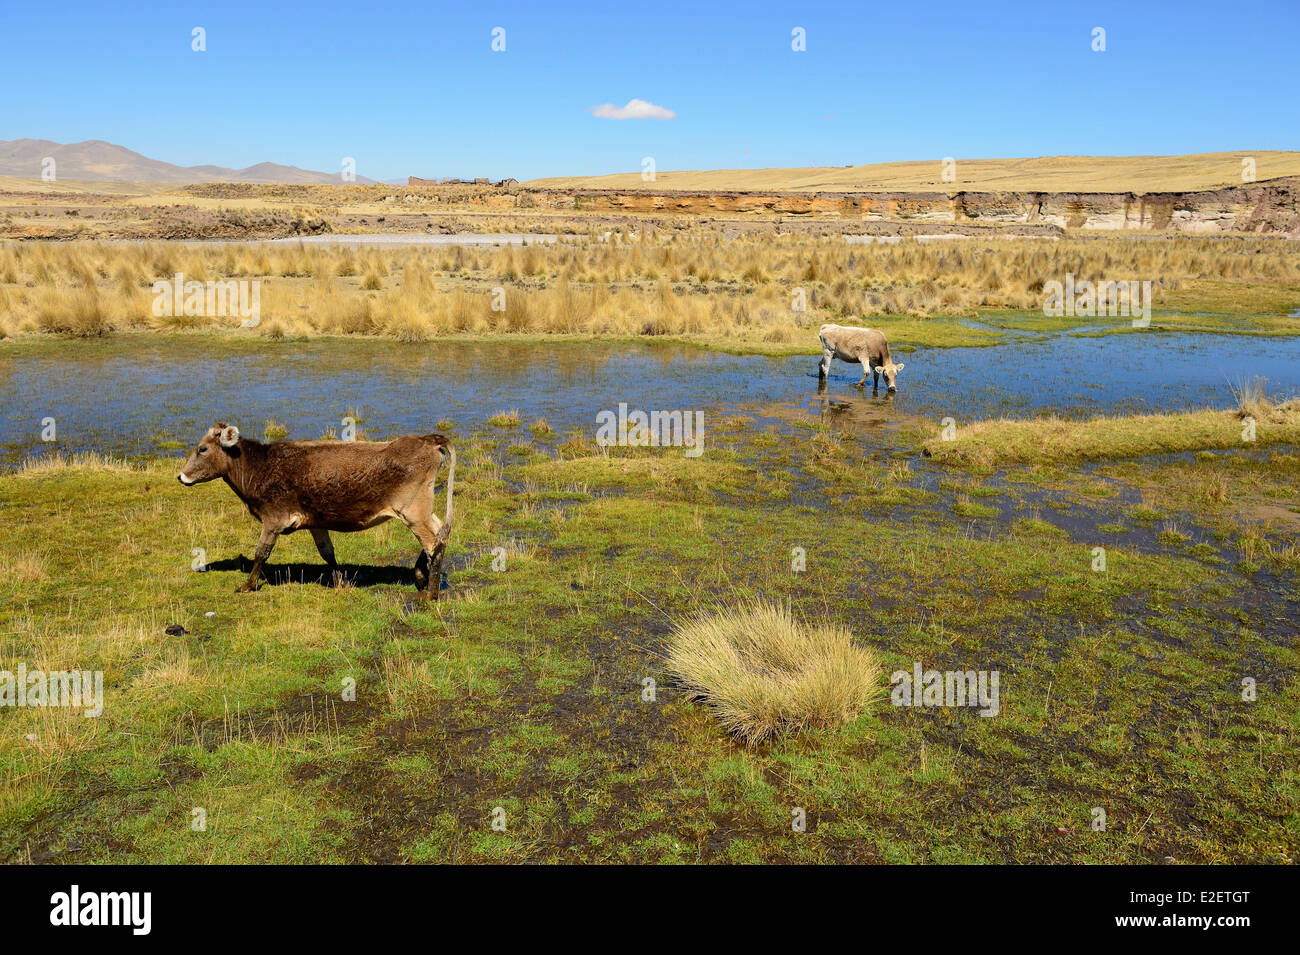 Peru, Espinar province, Coporaque, cows in a pond at the edge of the Apurimac river whose waters form the Amazon River Stock Photo